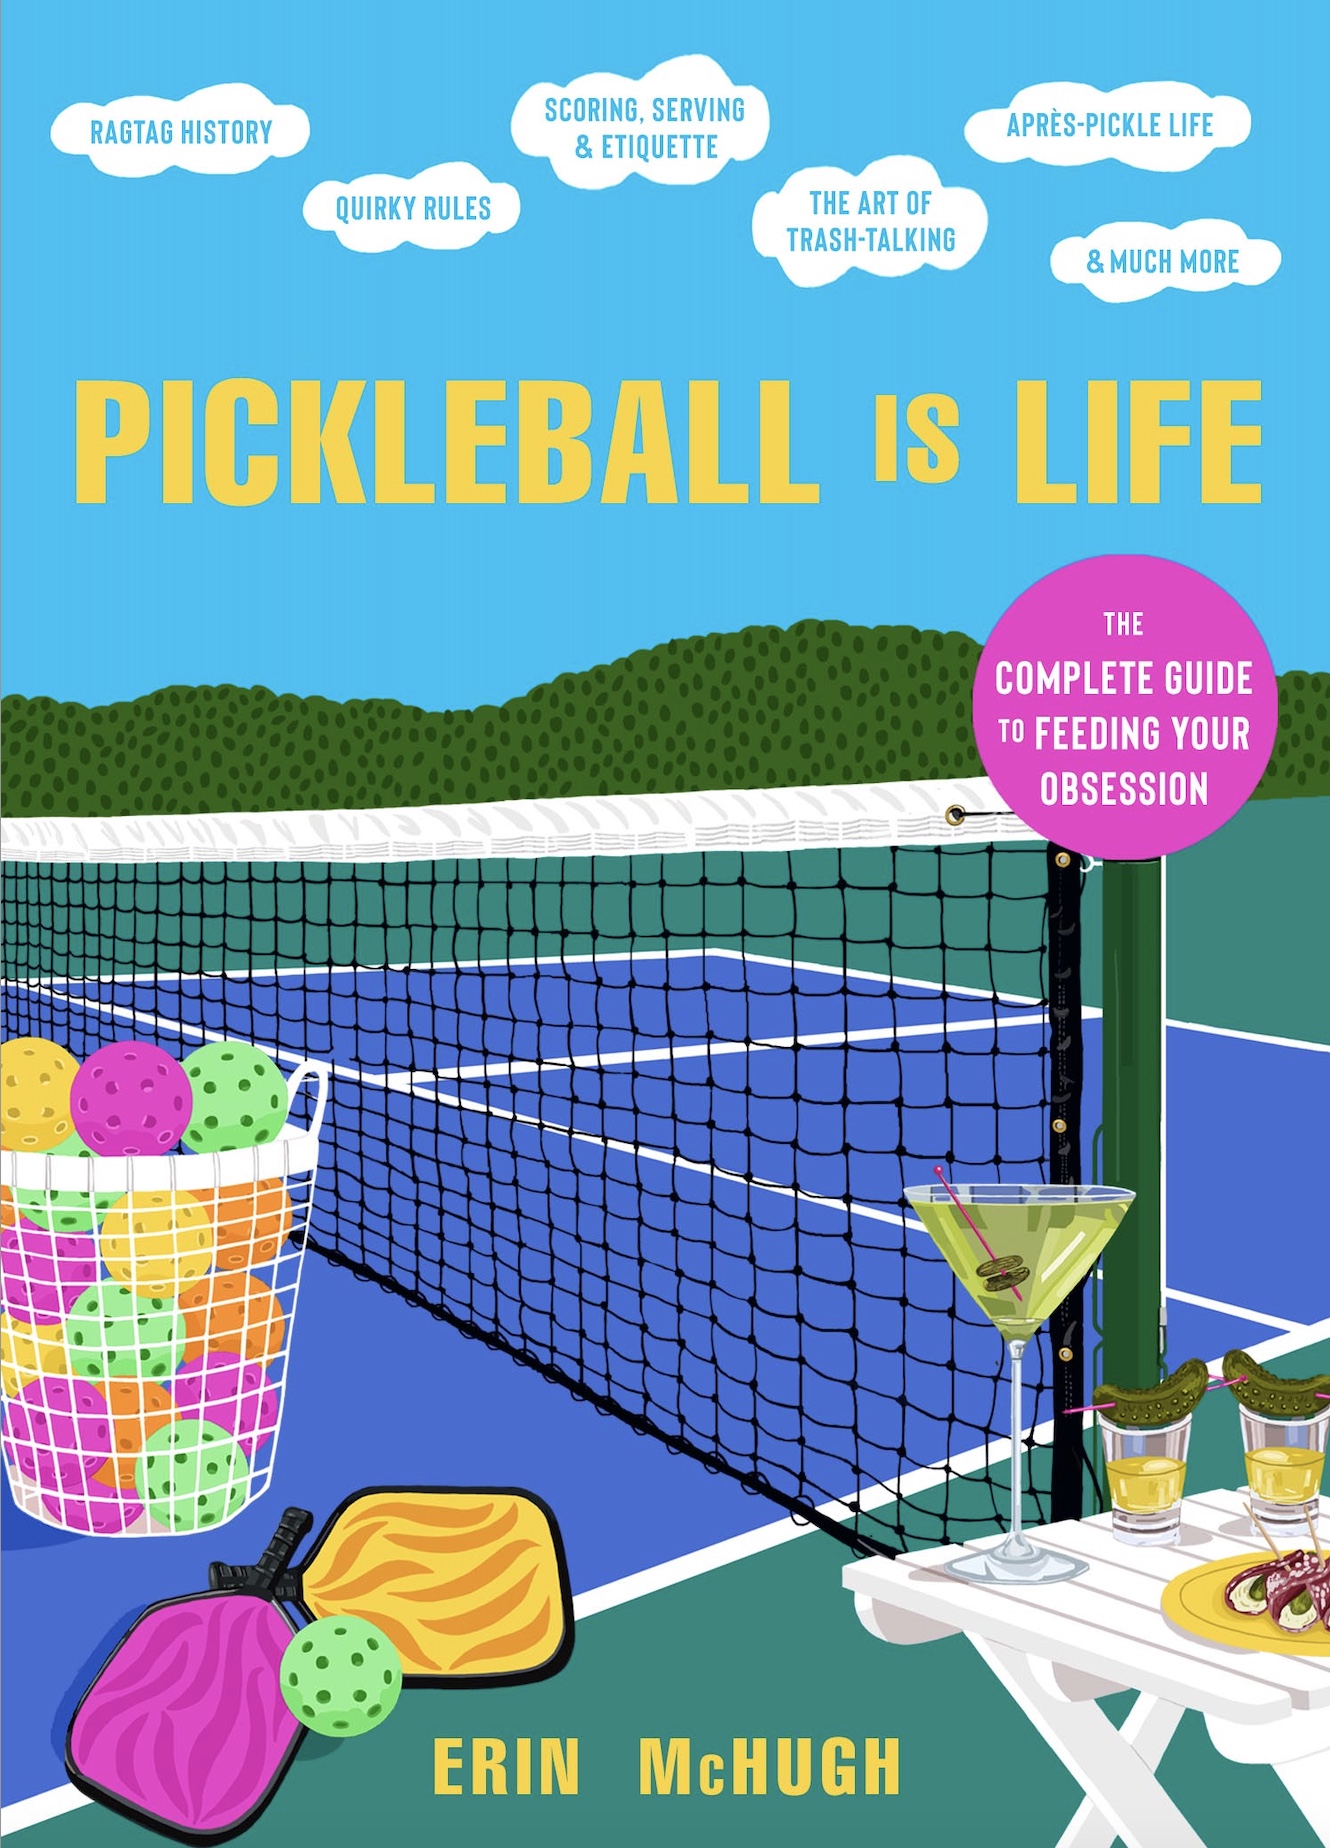 Image of the book, Pickleball is Life